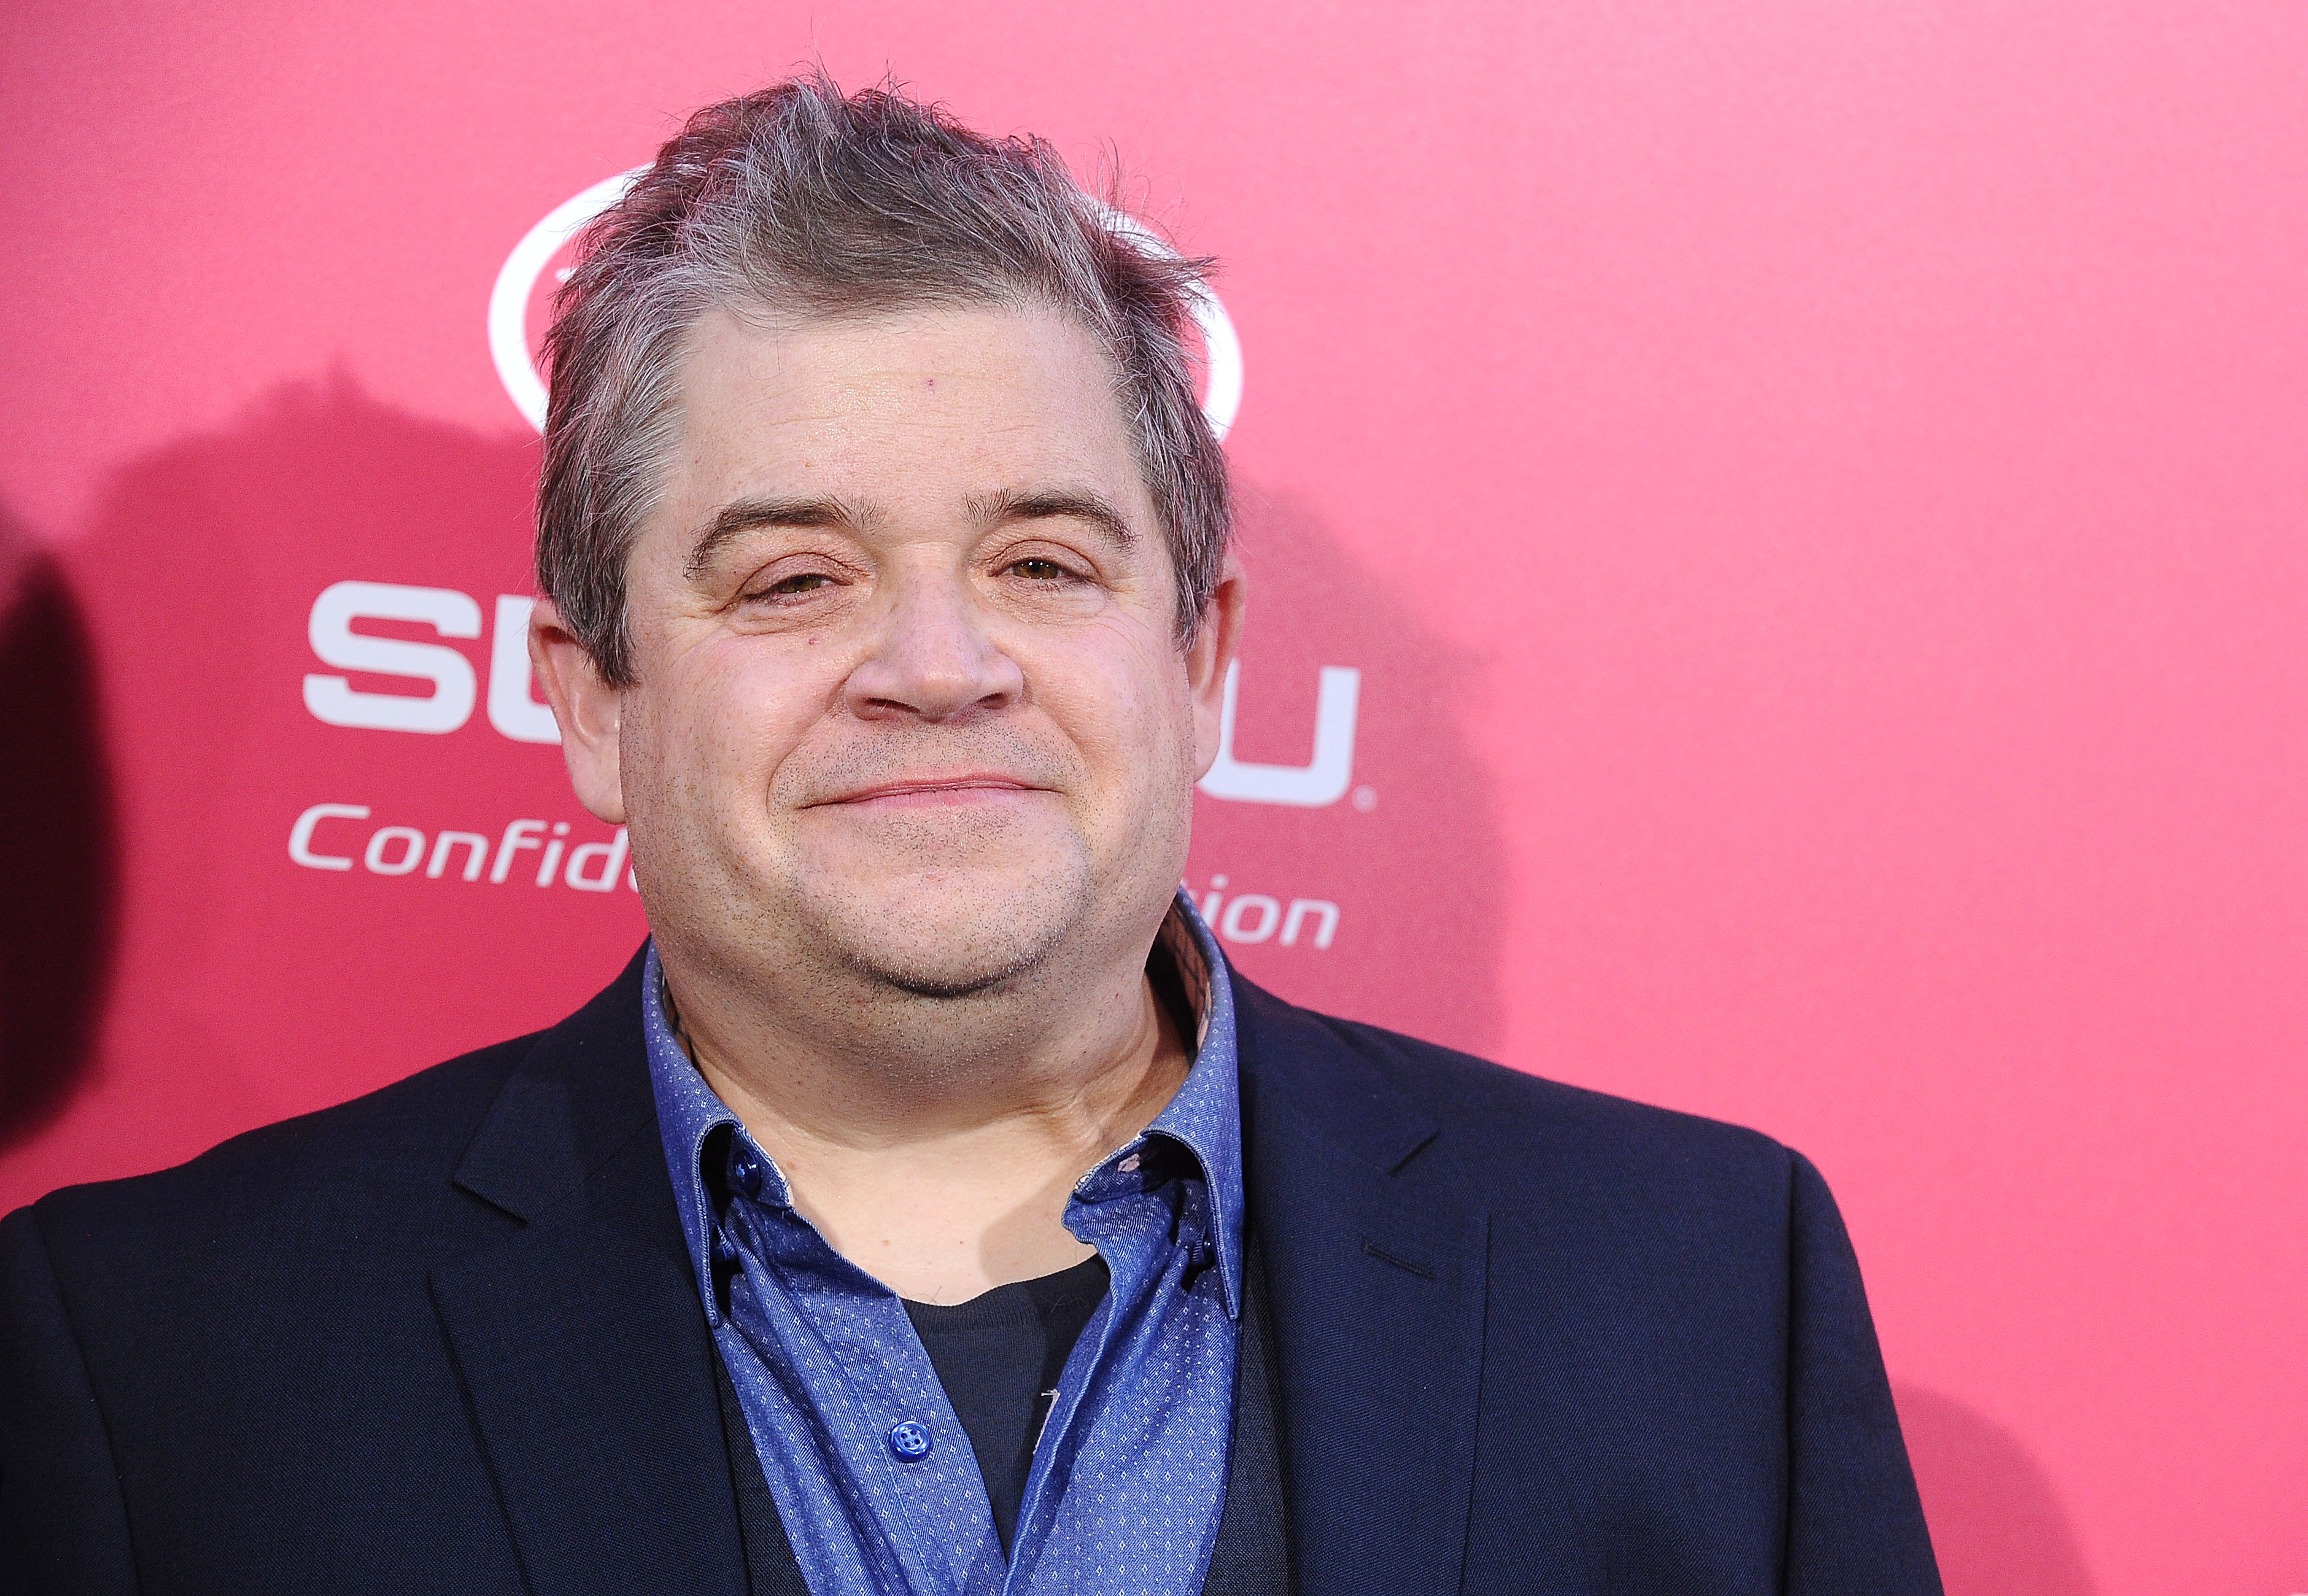 Patton Oswalt attends the premiere of "Baby Driver" at Ace Hotel in Los Angeles, California